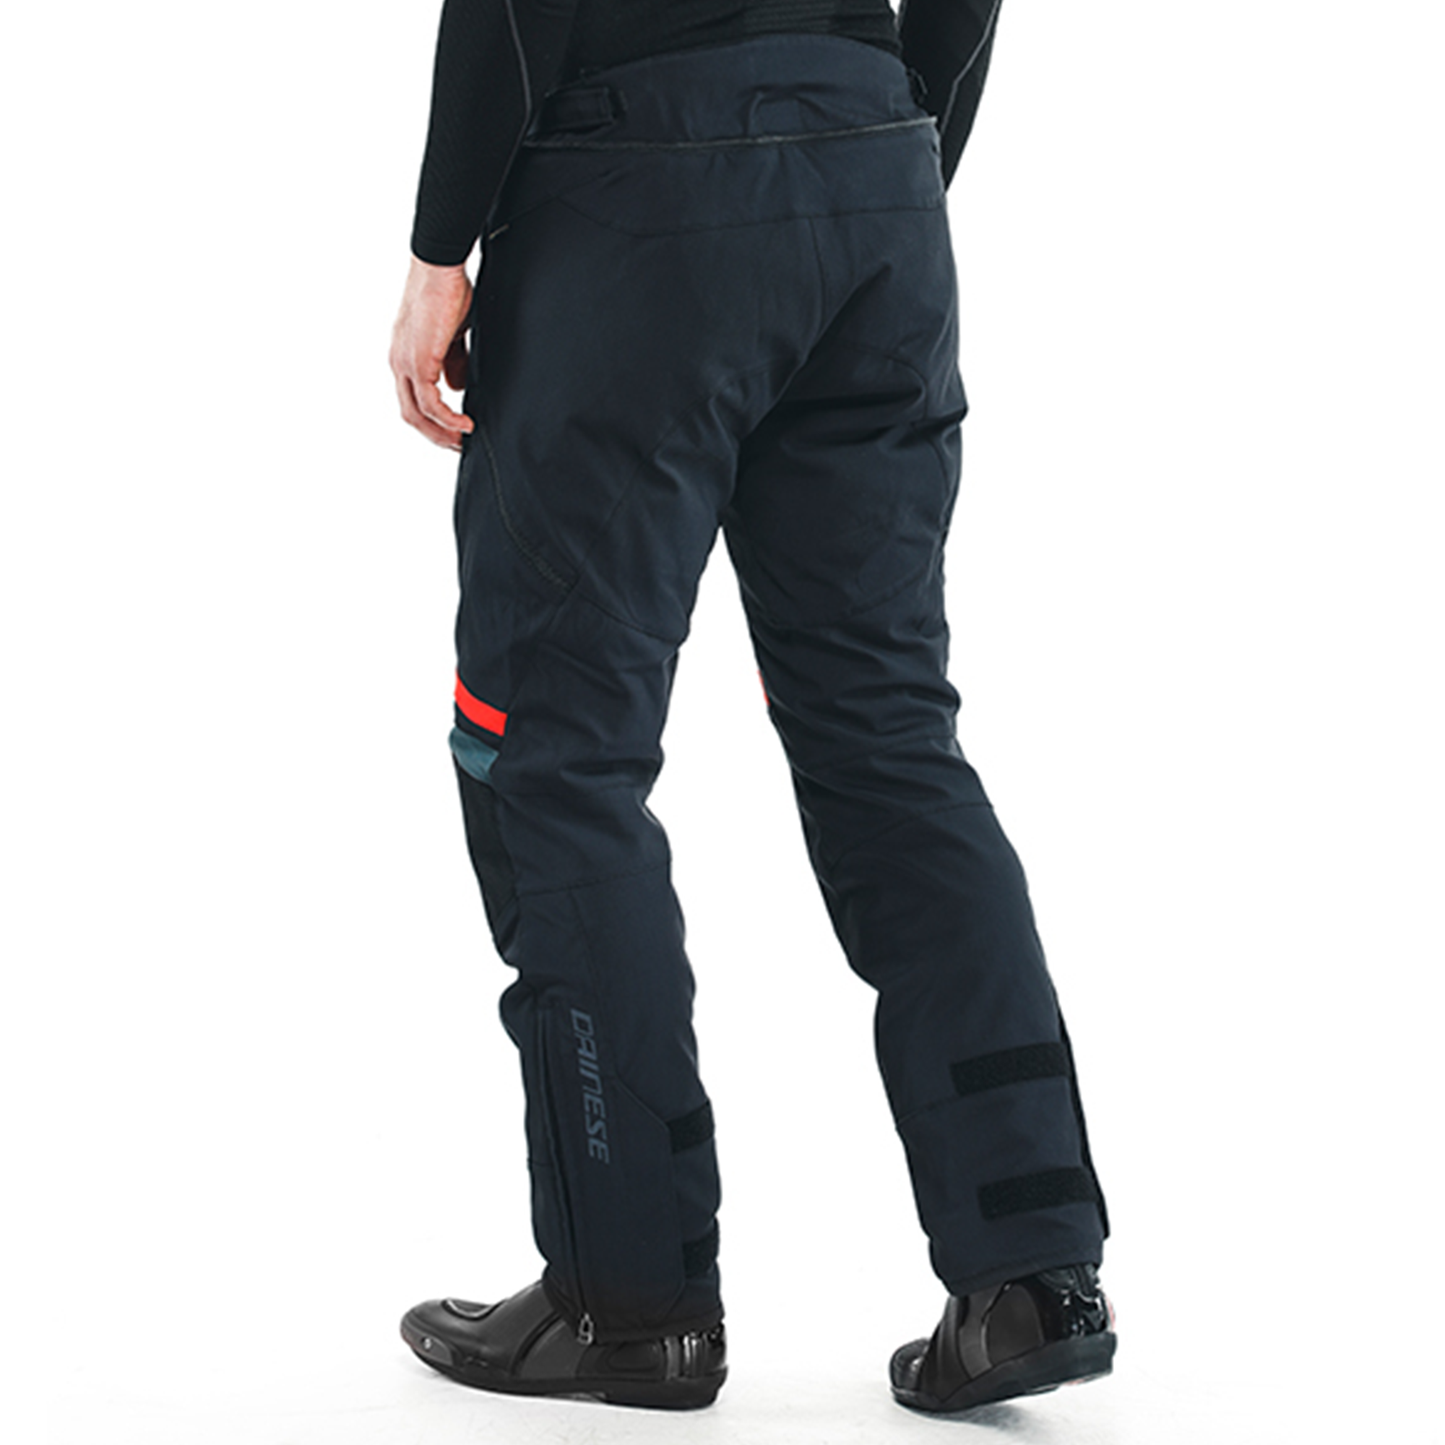 Dainese Carve Master 3 Gore-Tex Pants - B78